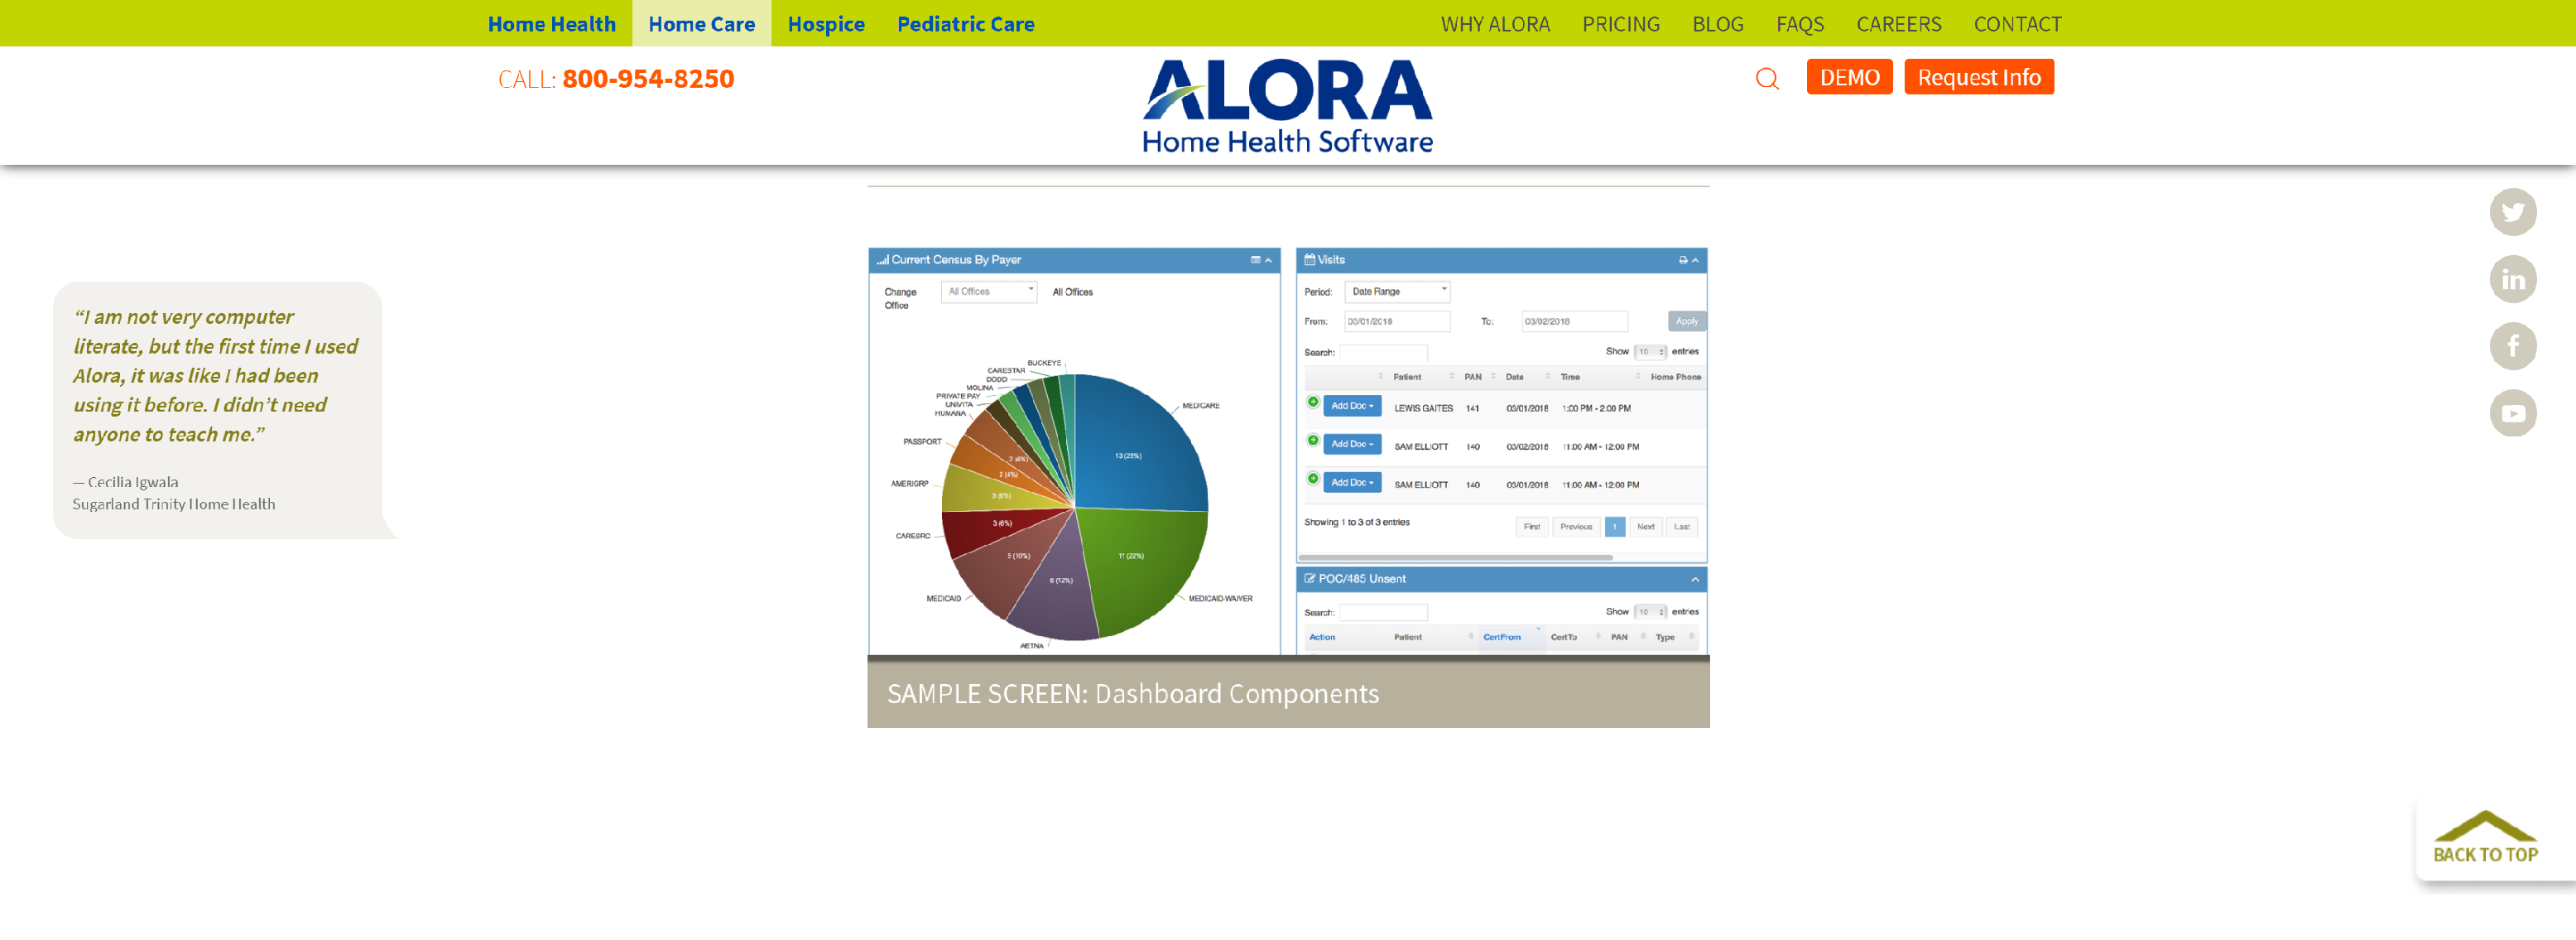 Home Health Charting Software